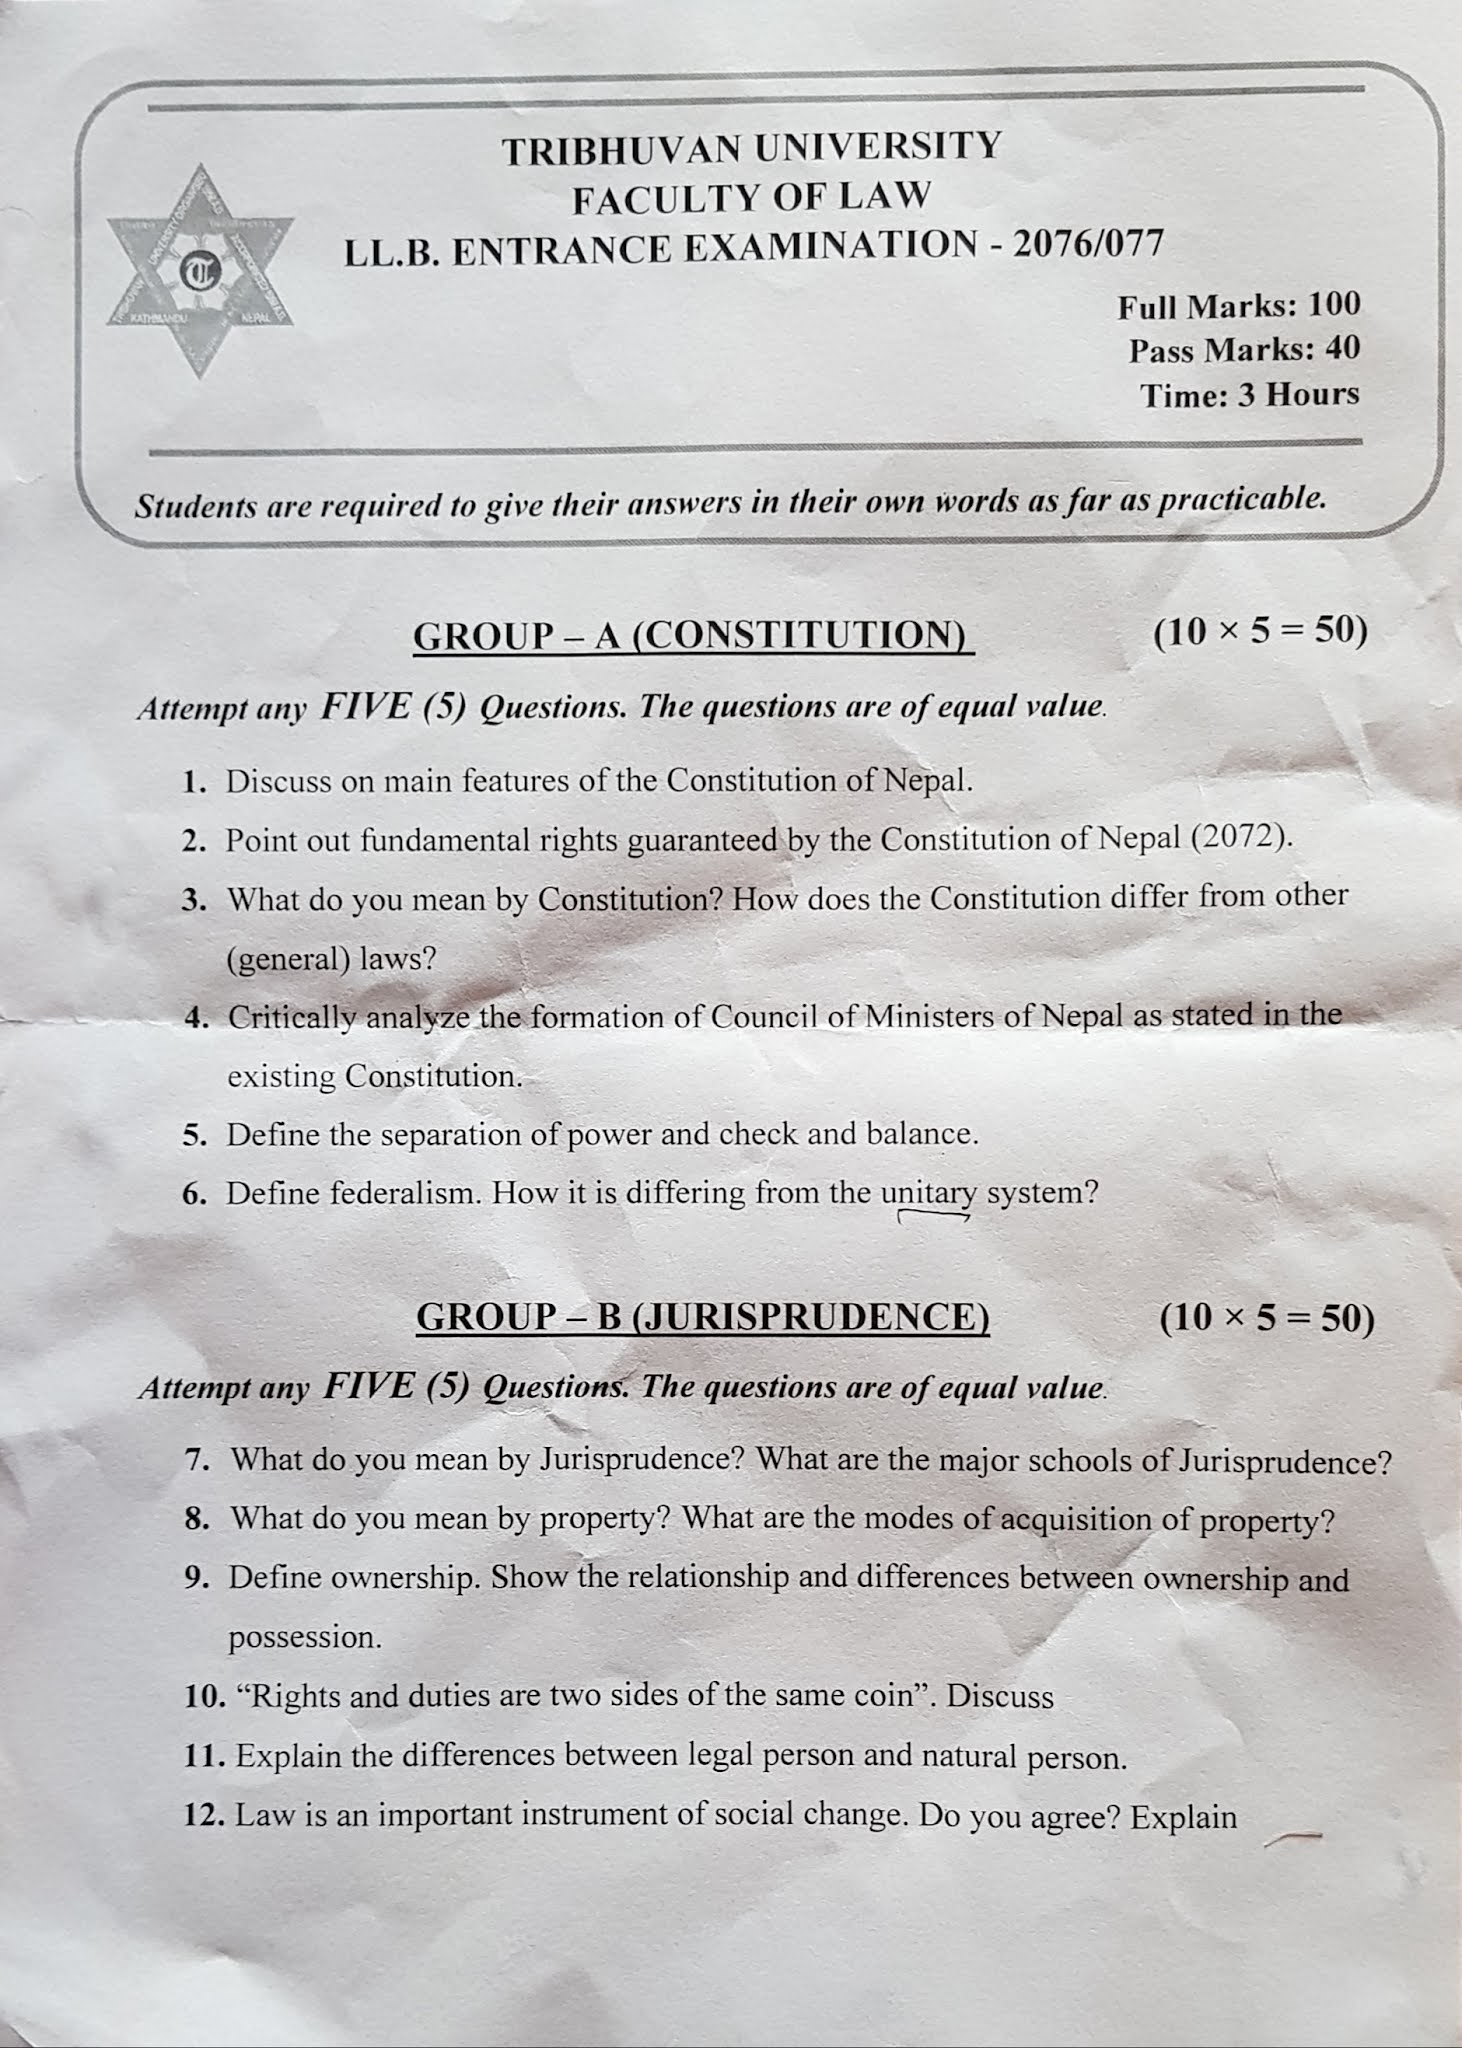 phd law entrance exam question papers with answers